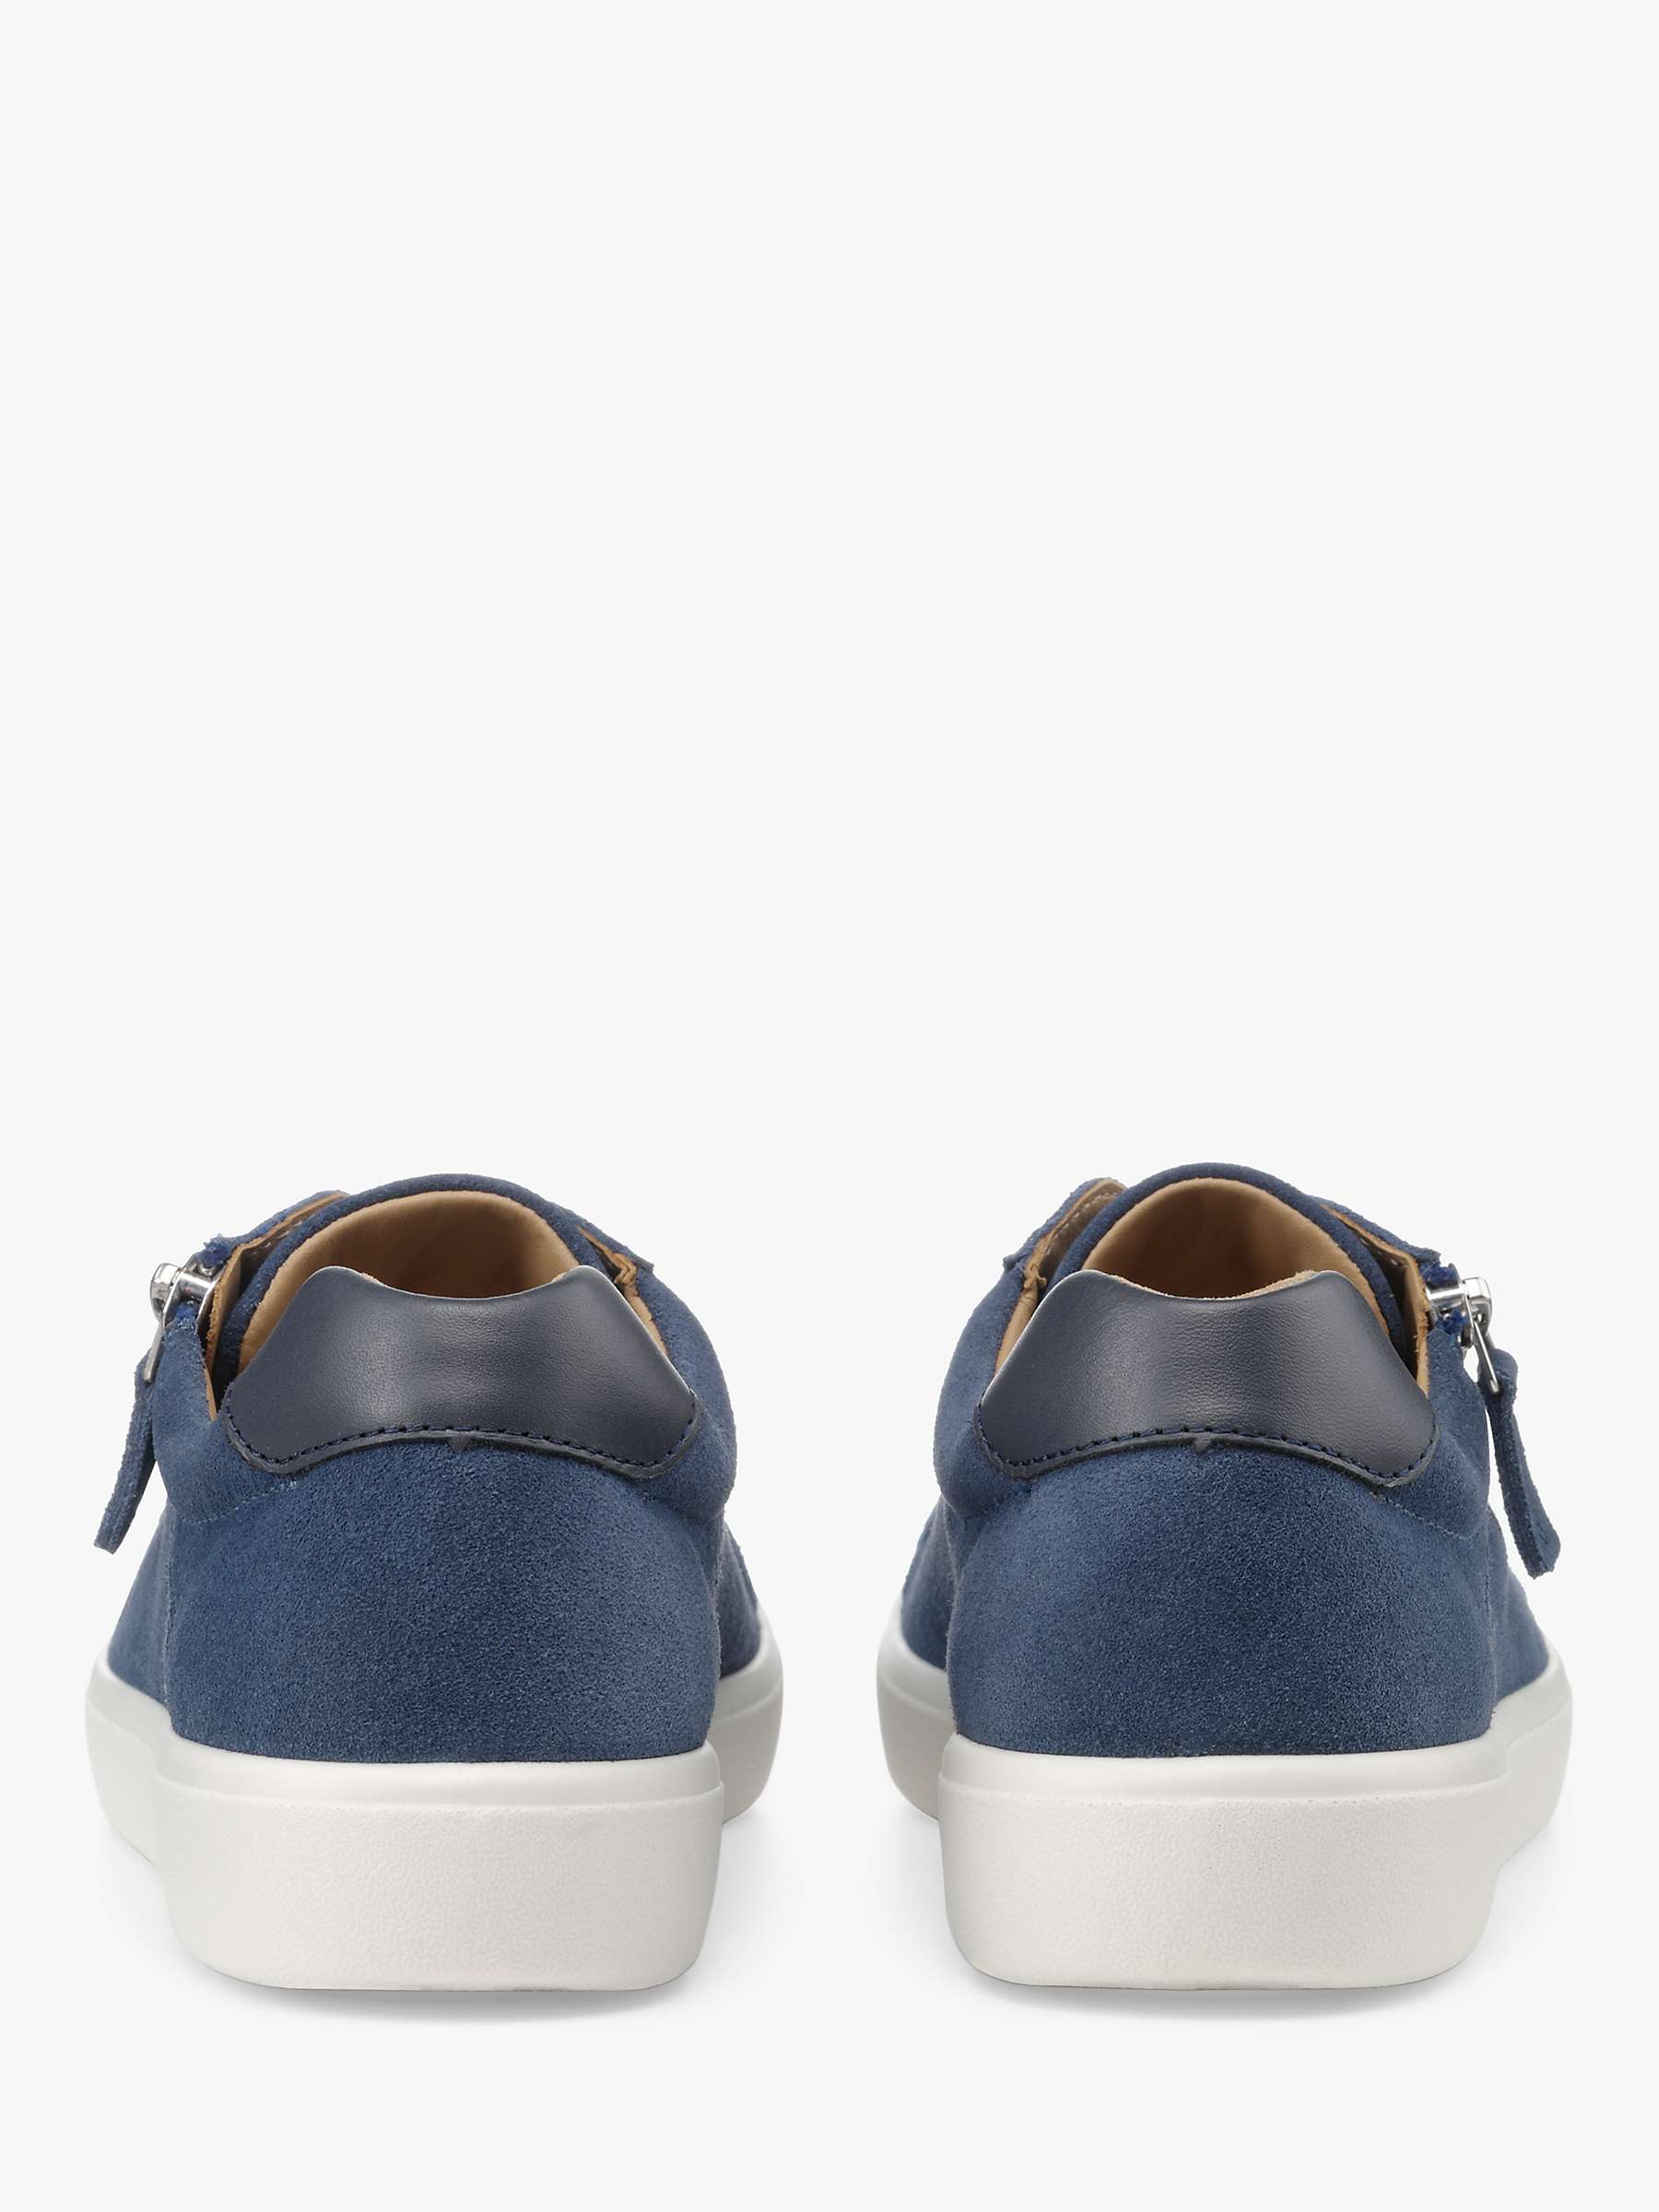 Buy Hotter Chase II Suede Zip and Go Trainers, Denim Blue Online at johnlewis.com